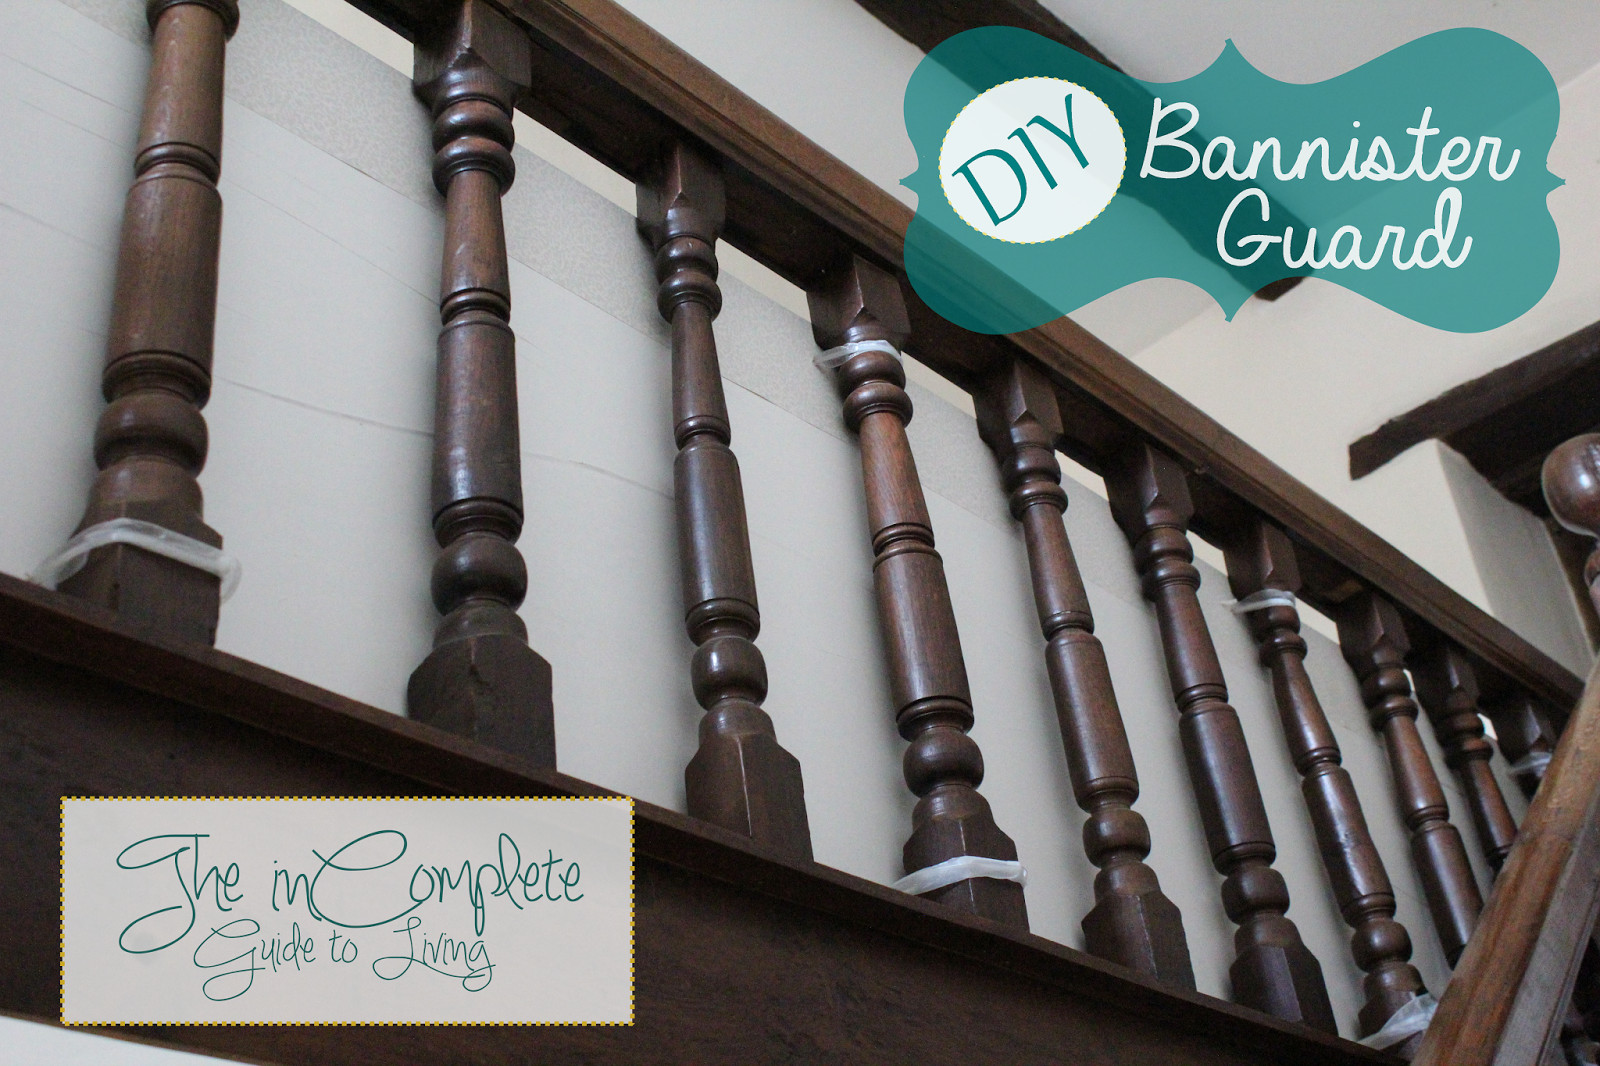 DIY Baby Proofing
 In plete Guide to Living DIY Babyproofing Bannister